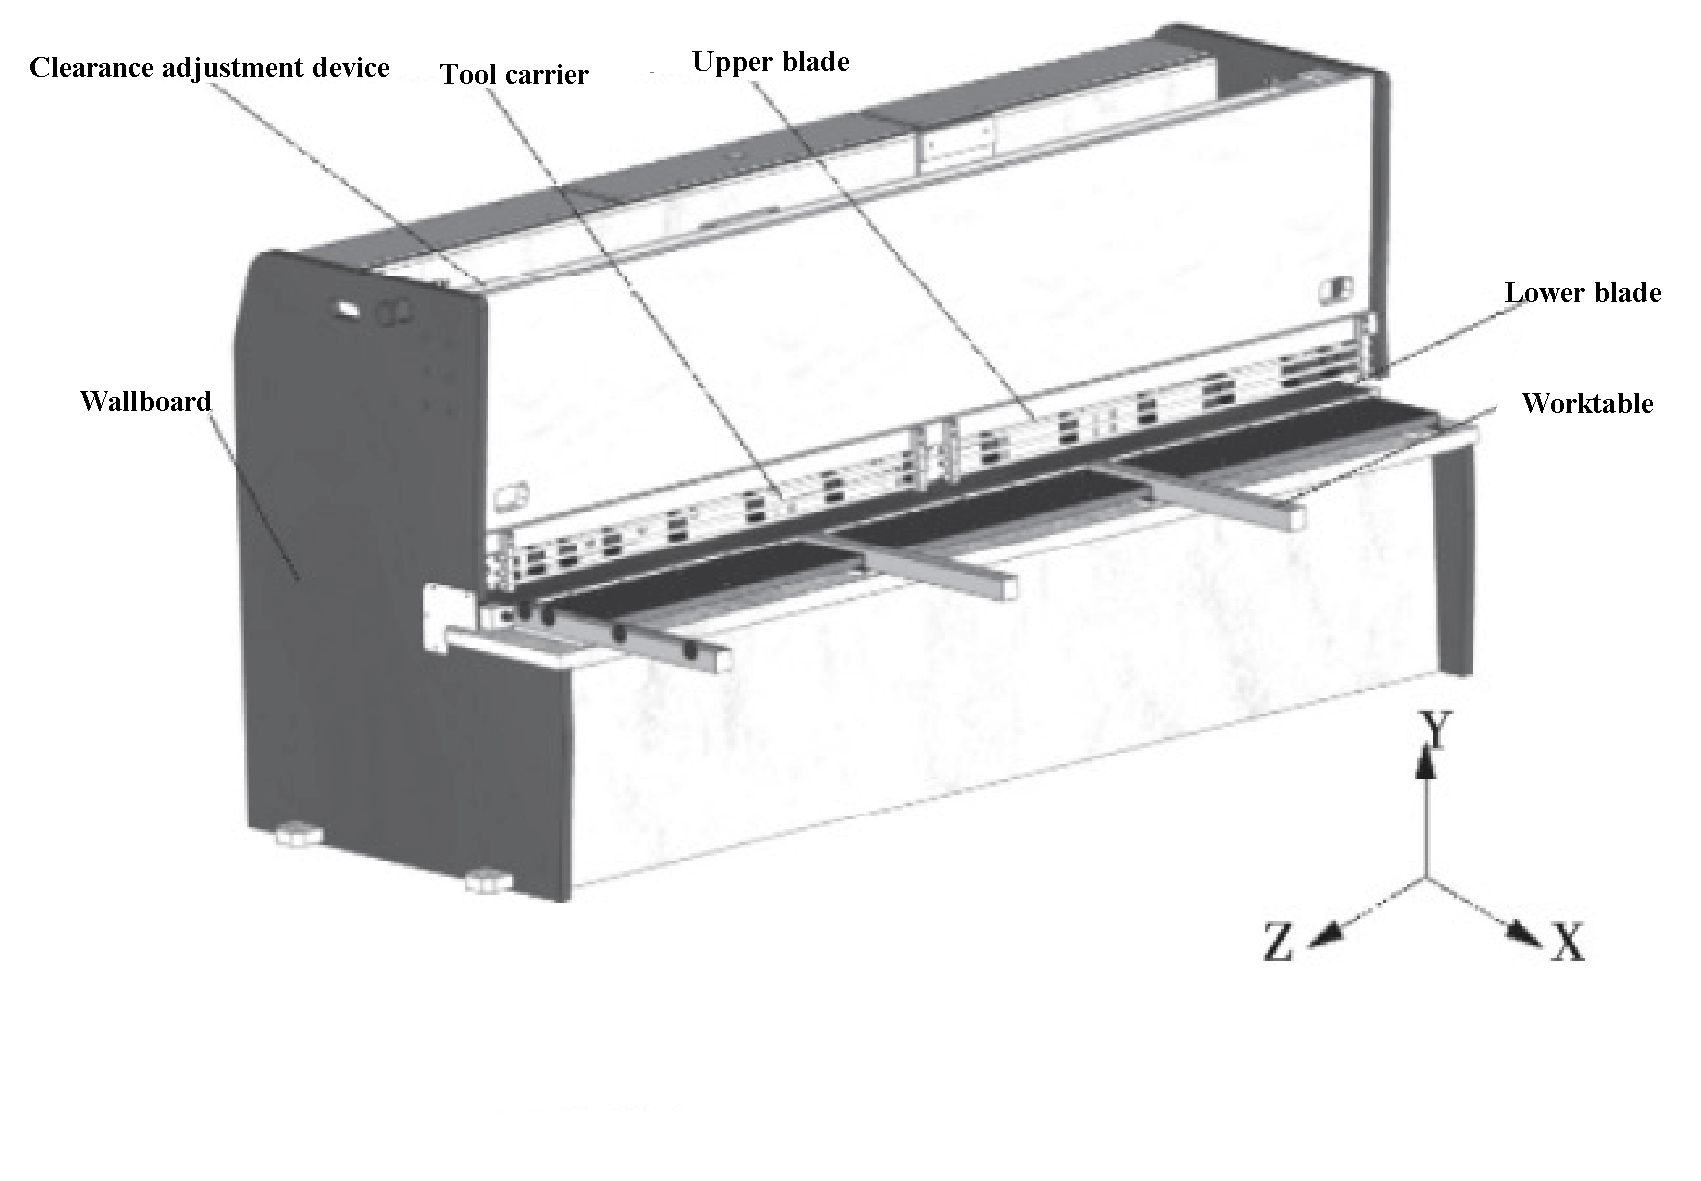 Structural model of 6 × 3200 NC guillotine shear